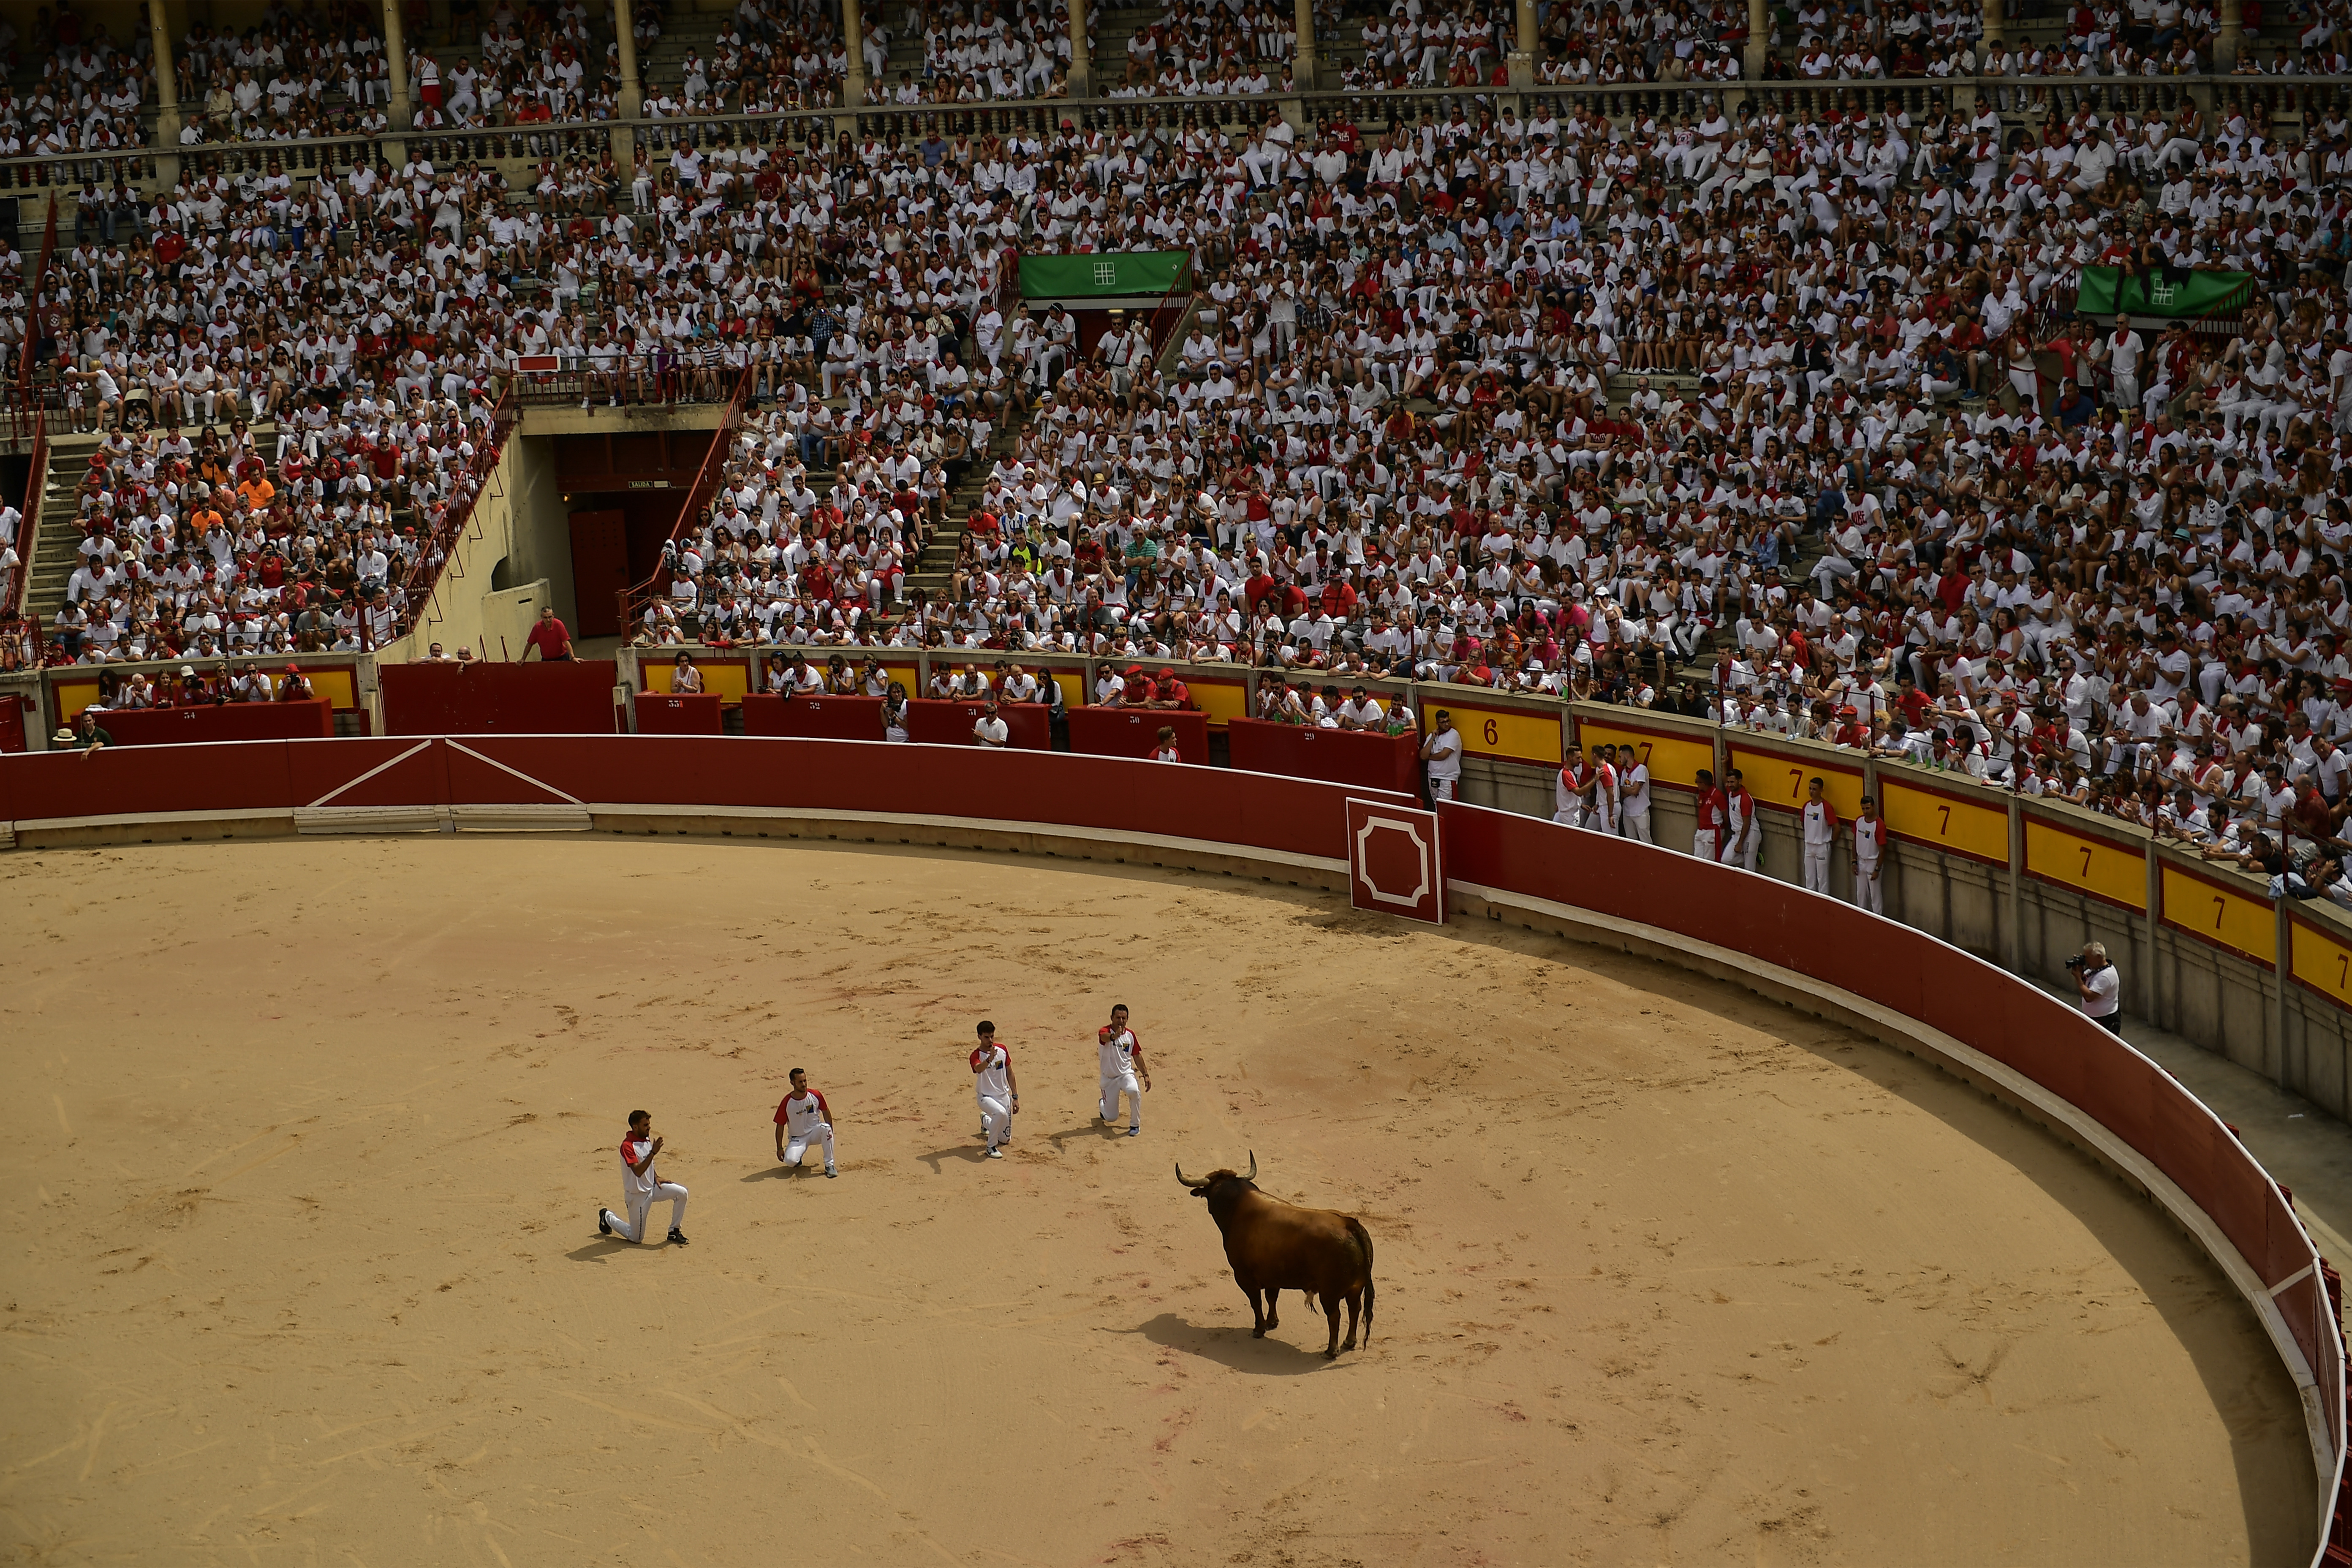 Members of ''Recortadores'' saulte a bull during a performance in the bullring at the San Fermin Festival, in Pamplona, northern Spain, Saturday, July 13, 2019. Revelers from around the world flock to Pamplona every year to take part in the eight days of the running of the bulls. (AP Photo/Alvaro Barrientos)